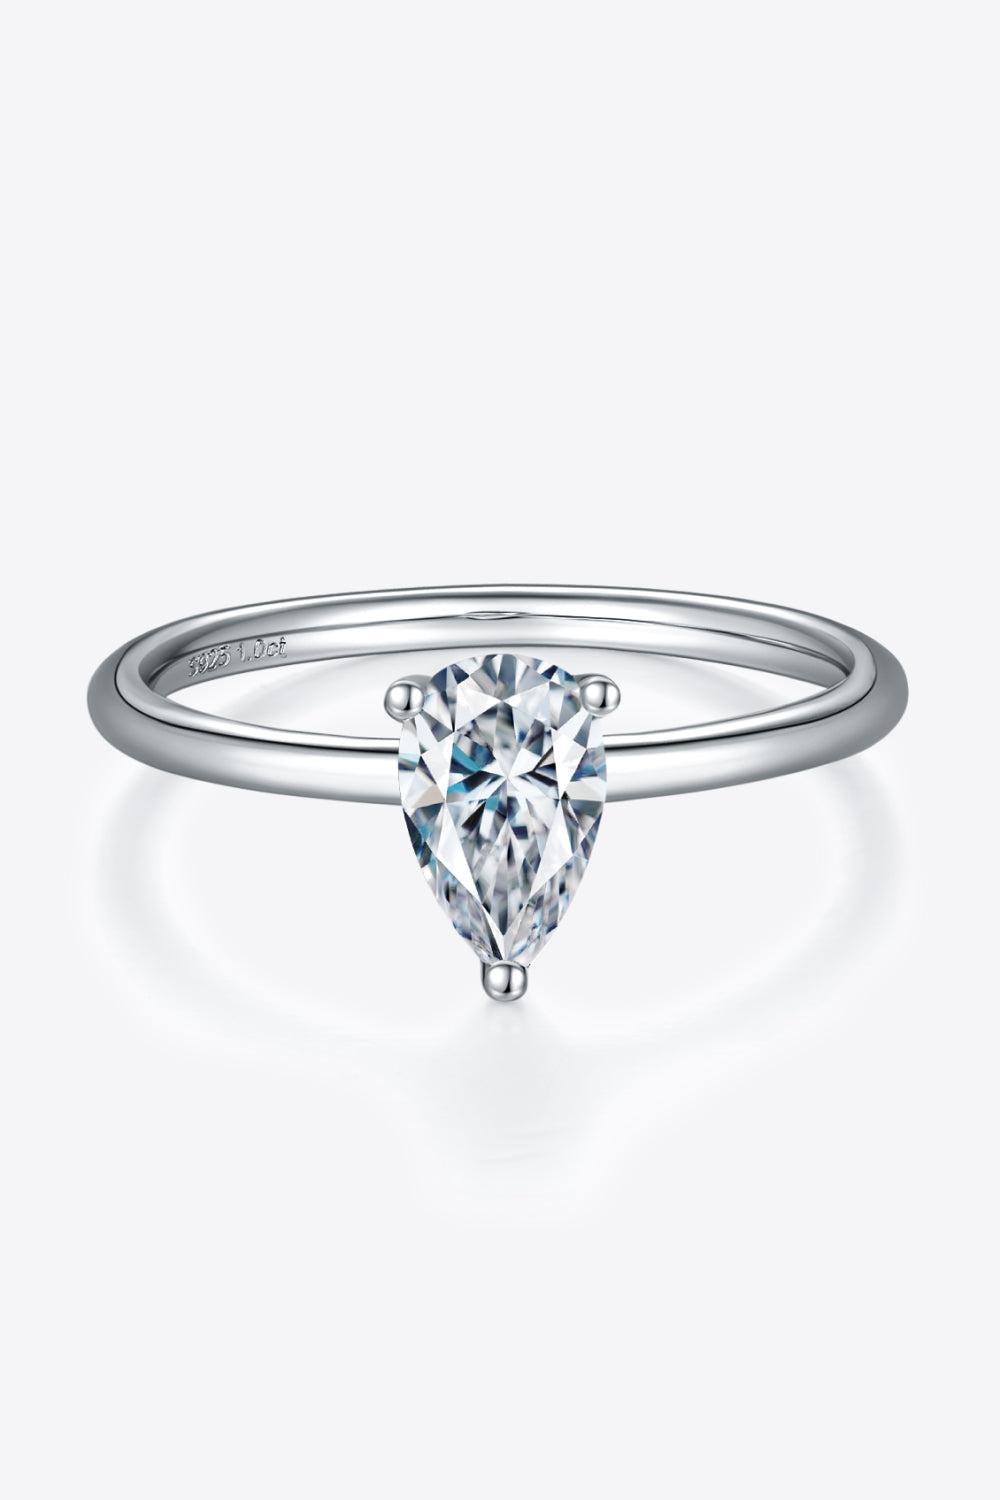 1 Carat Moissanite 925 Sterling Silver Solitaire Ring BLUE ZONE PLANET